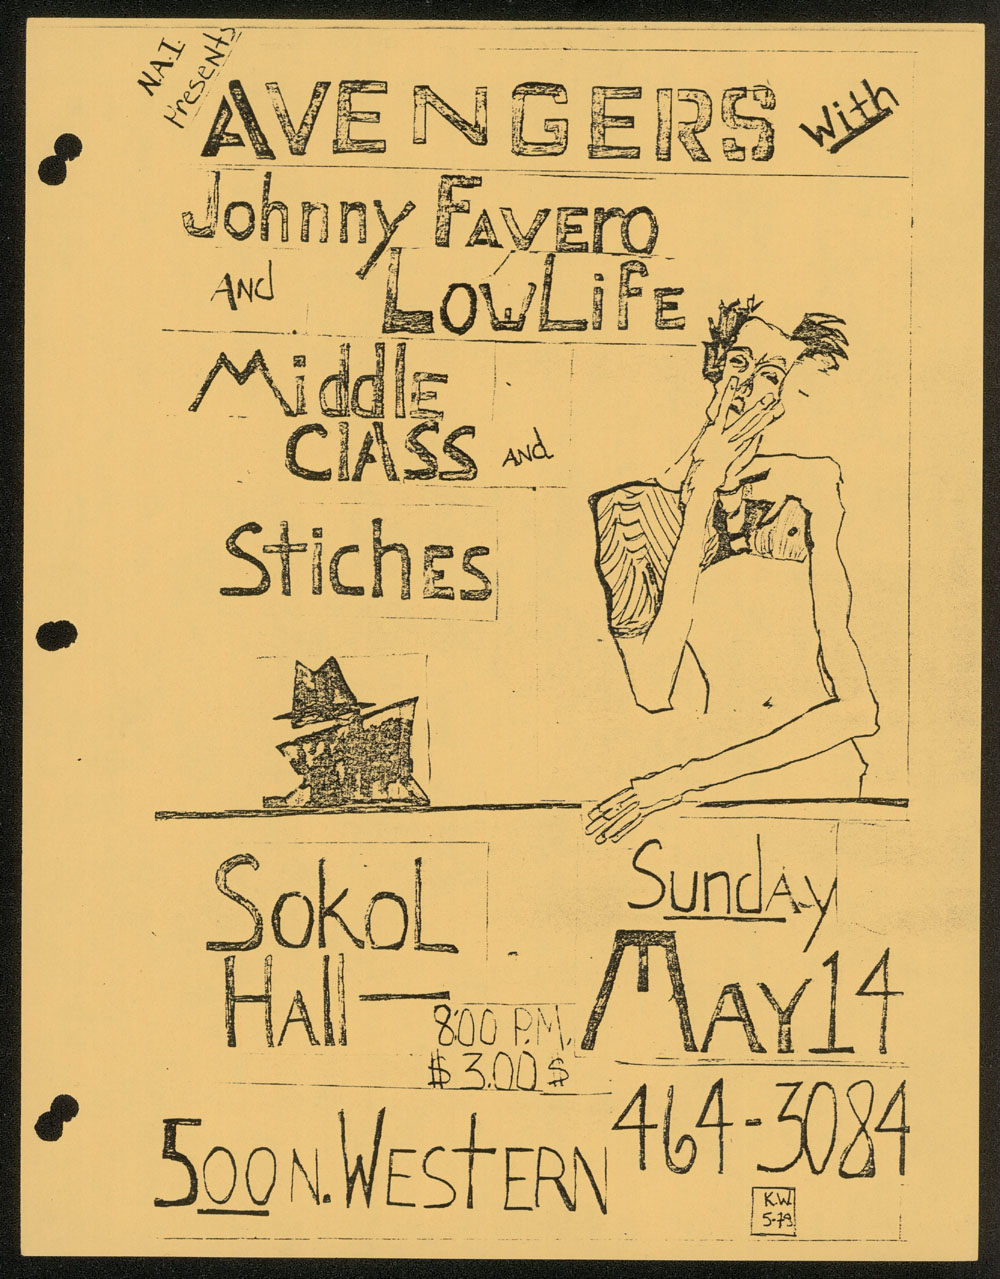 AVENGERS w/ Johnny Favero & Low Life, Middle Class, Stitches at Sokol Hall